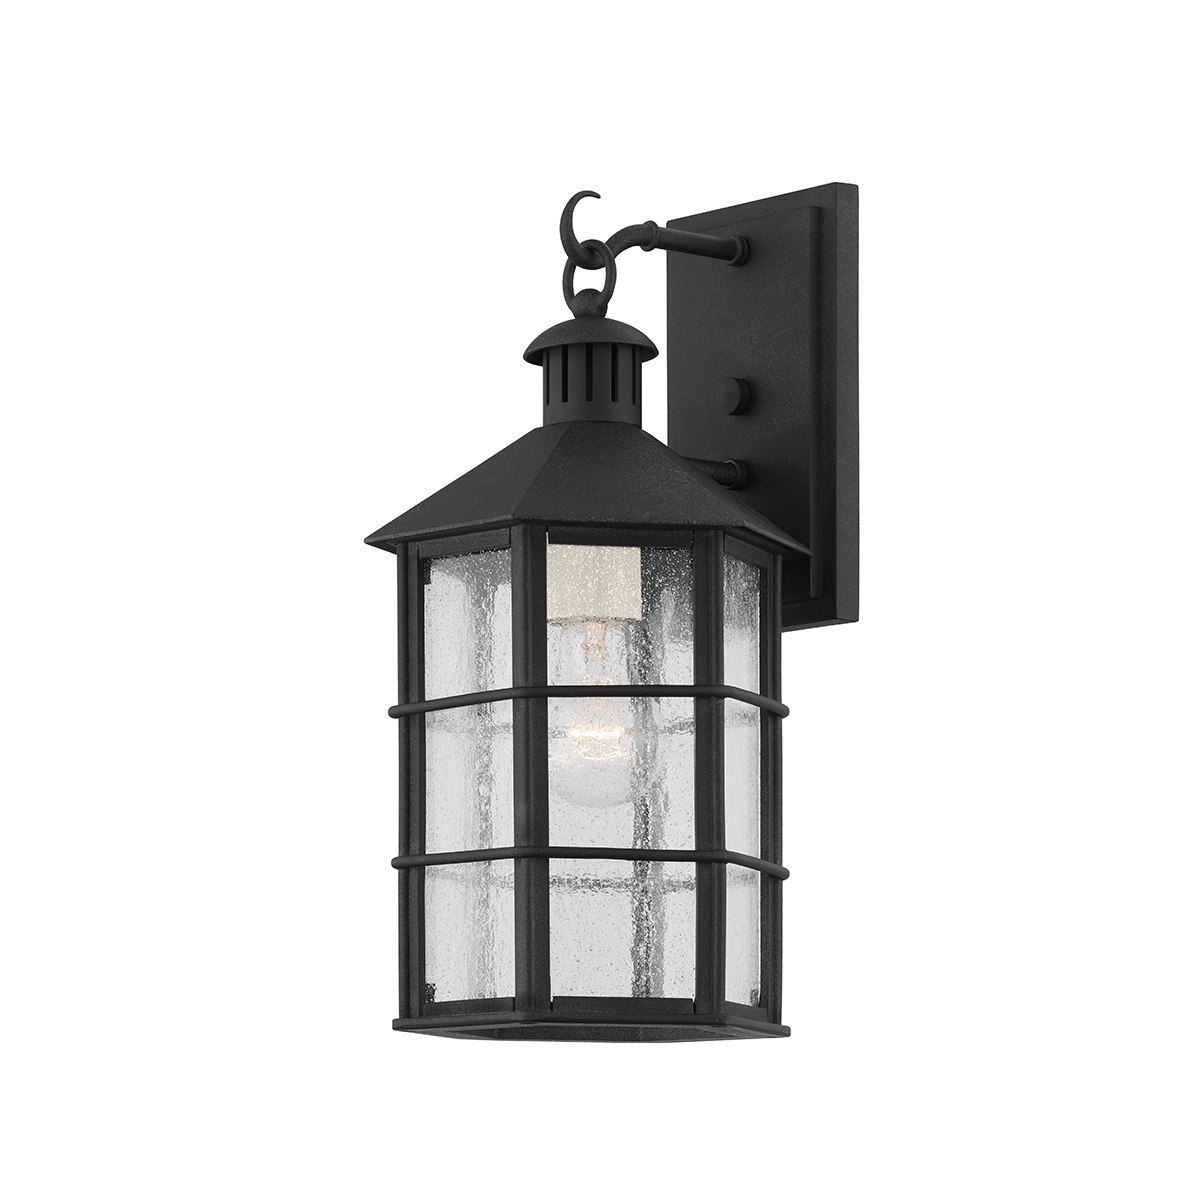 Troy Lighting 1 LIGHT EXTERIOR SMALL WALL SCONCE B2511 Outdoor l Wall Troy Lighting FRENCH IRON  